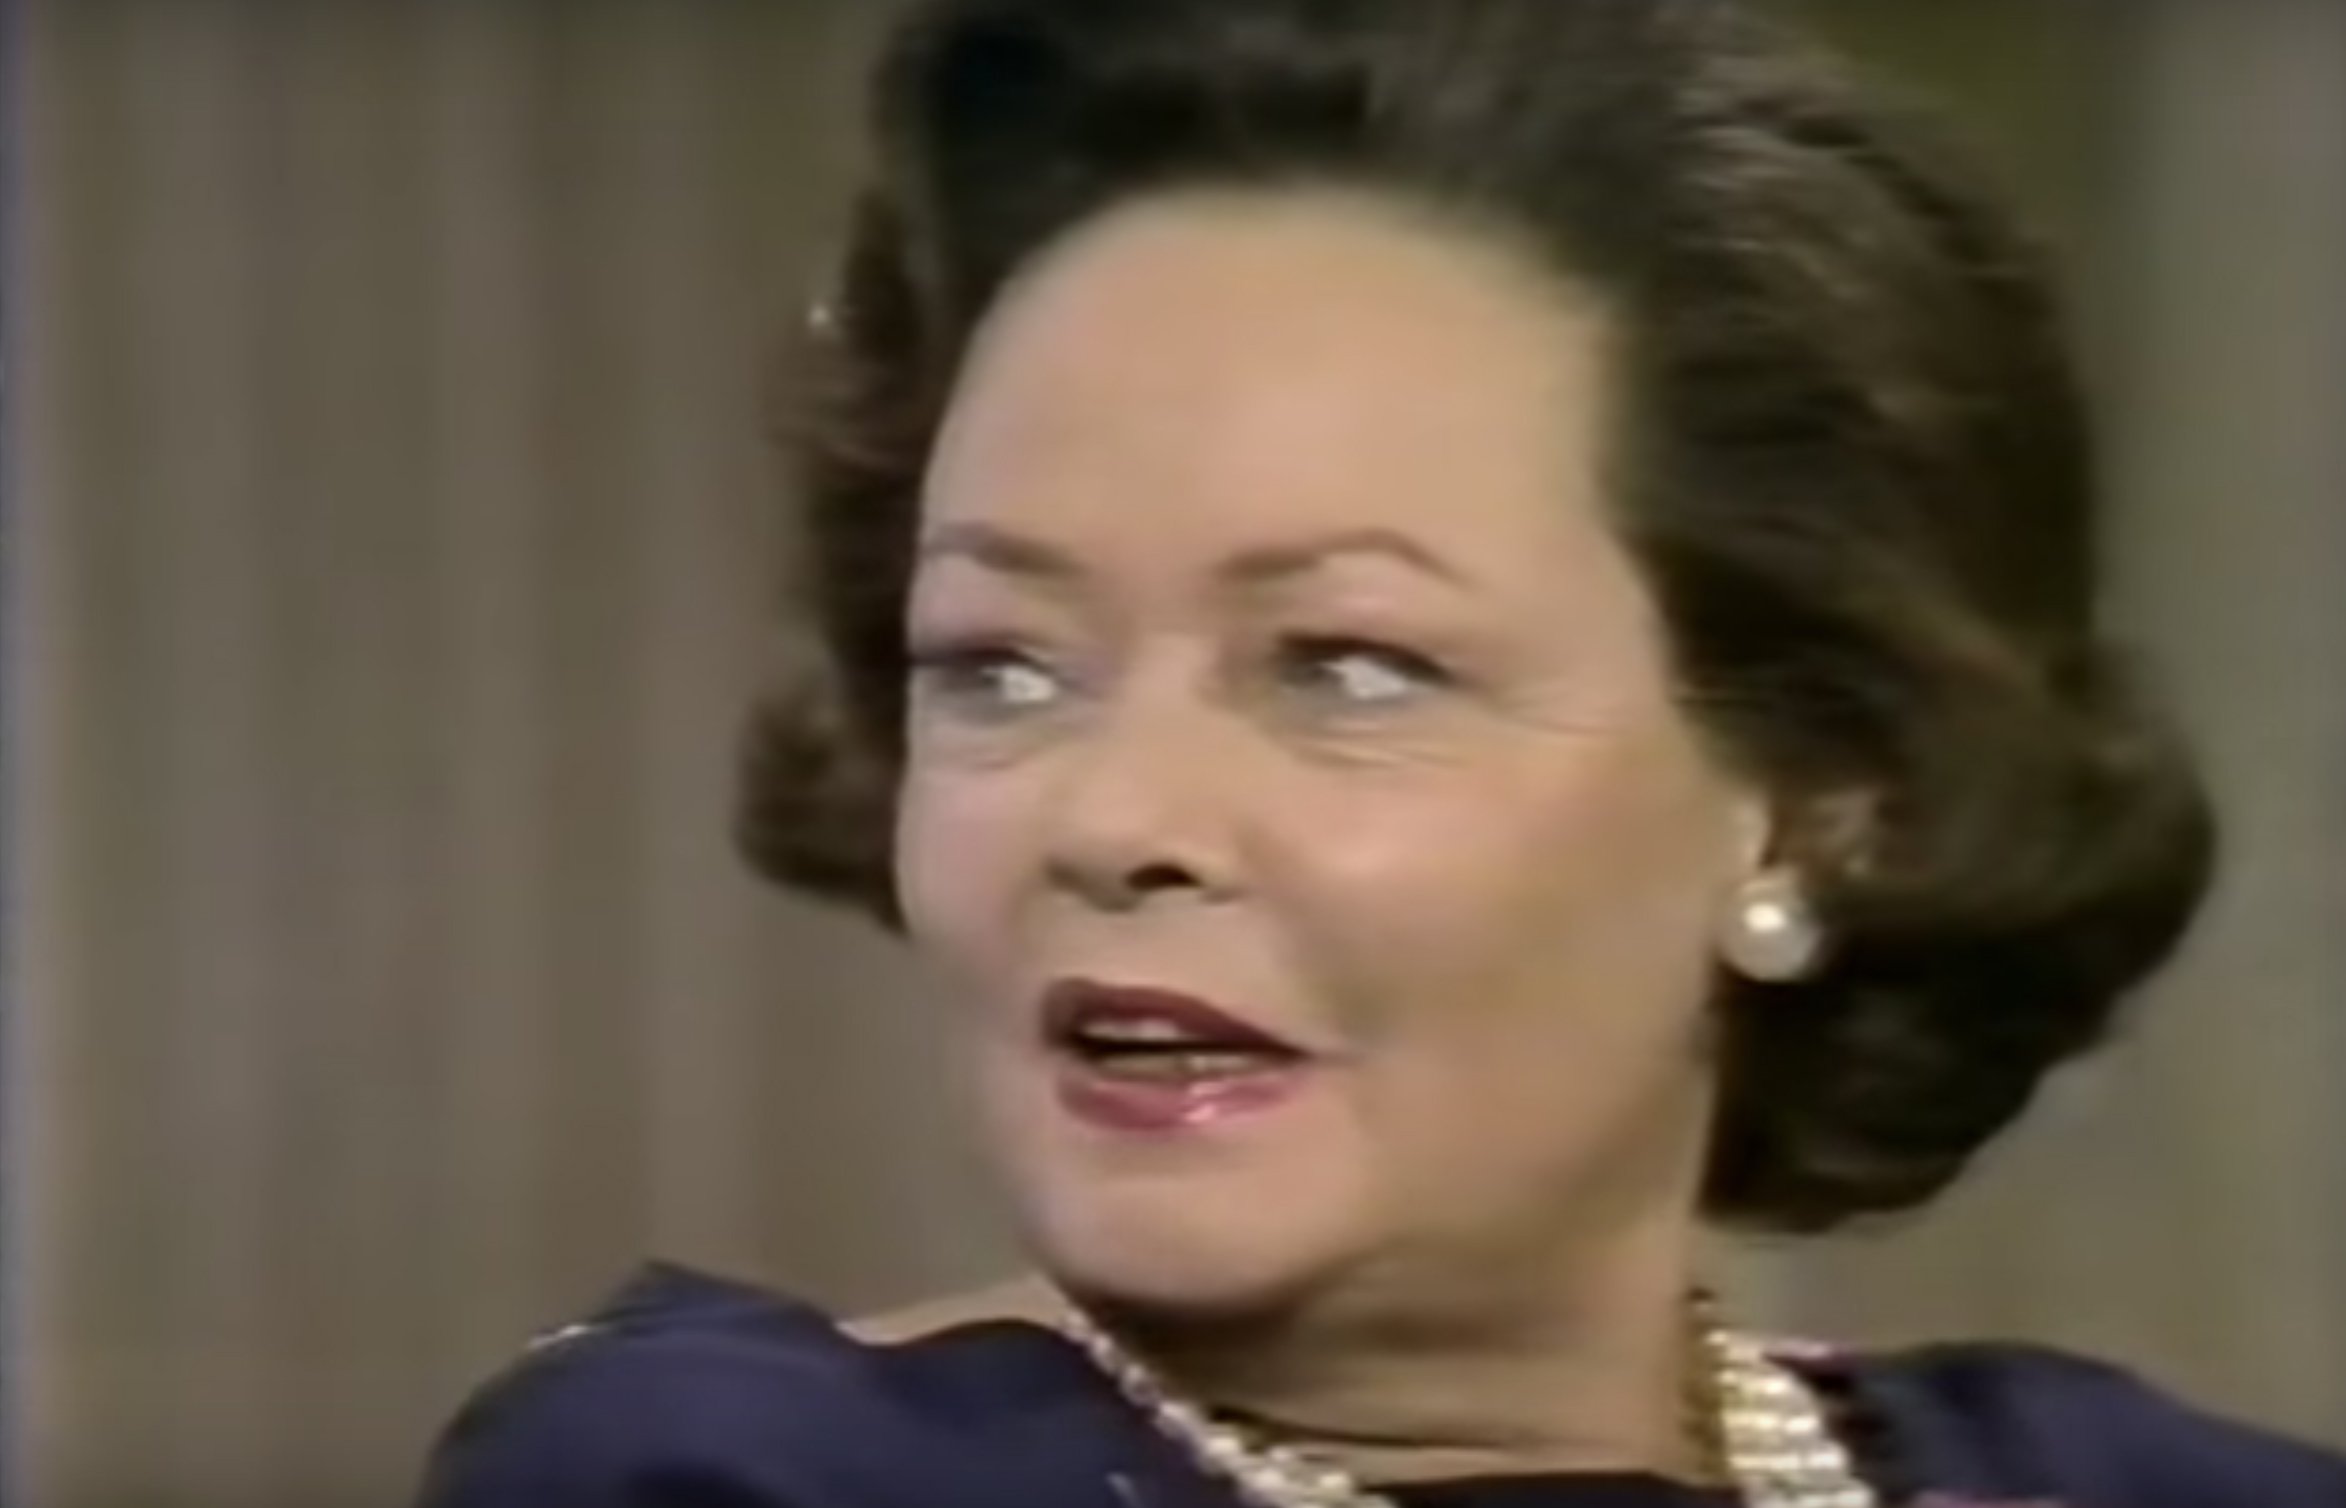 Gene Tierney during an 1979 TV interview. : Source: YouTube/AlanEichler